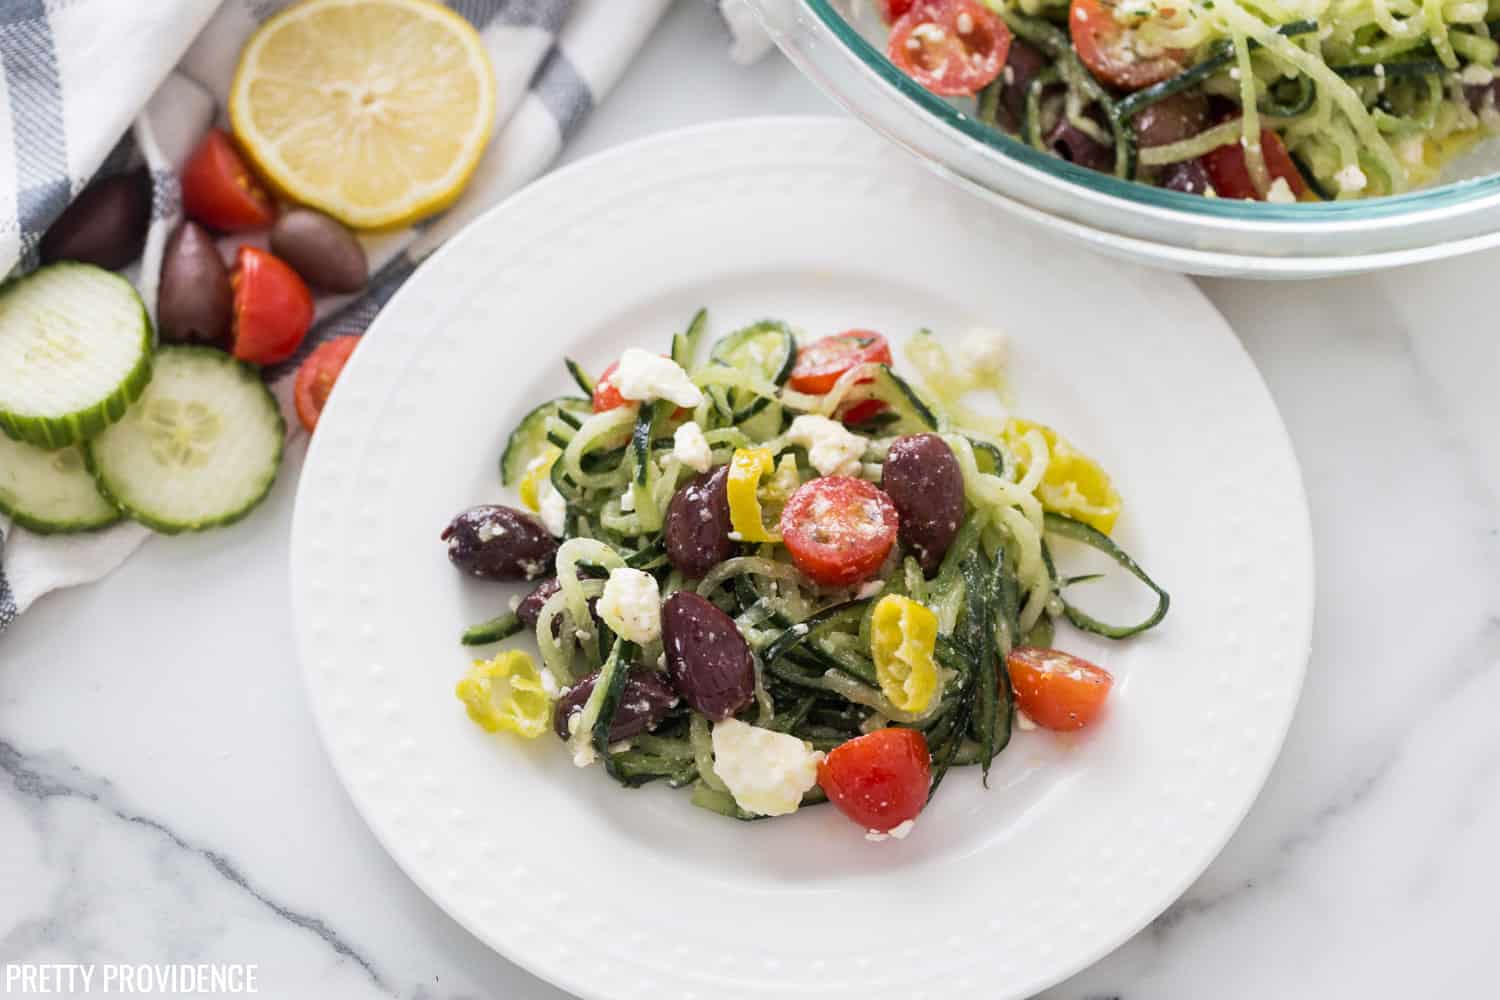 Spiralized zucchini recipe for authentic greek salad on a white plate with kalamata olives, pepperoncini, tomatoes and feta cheese.